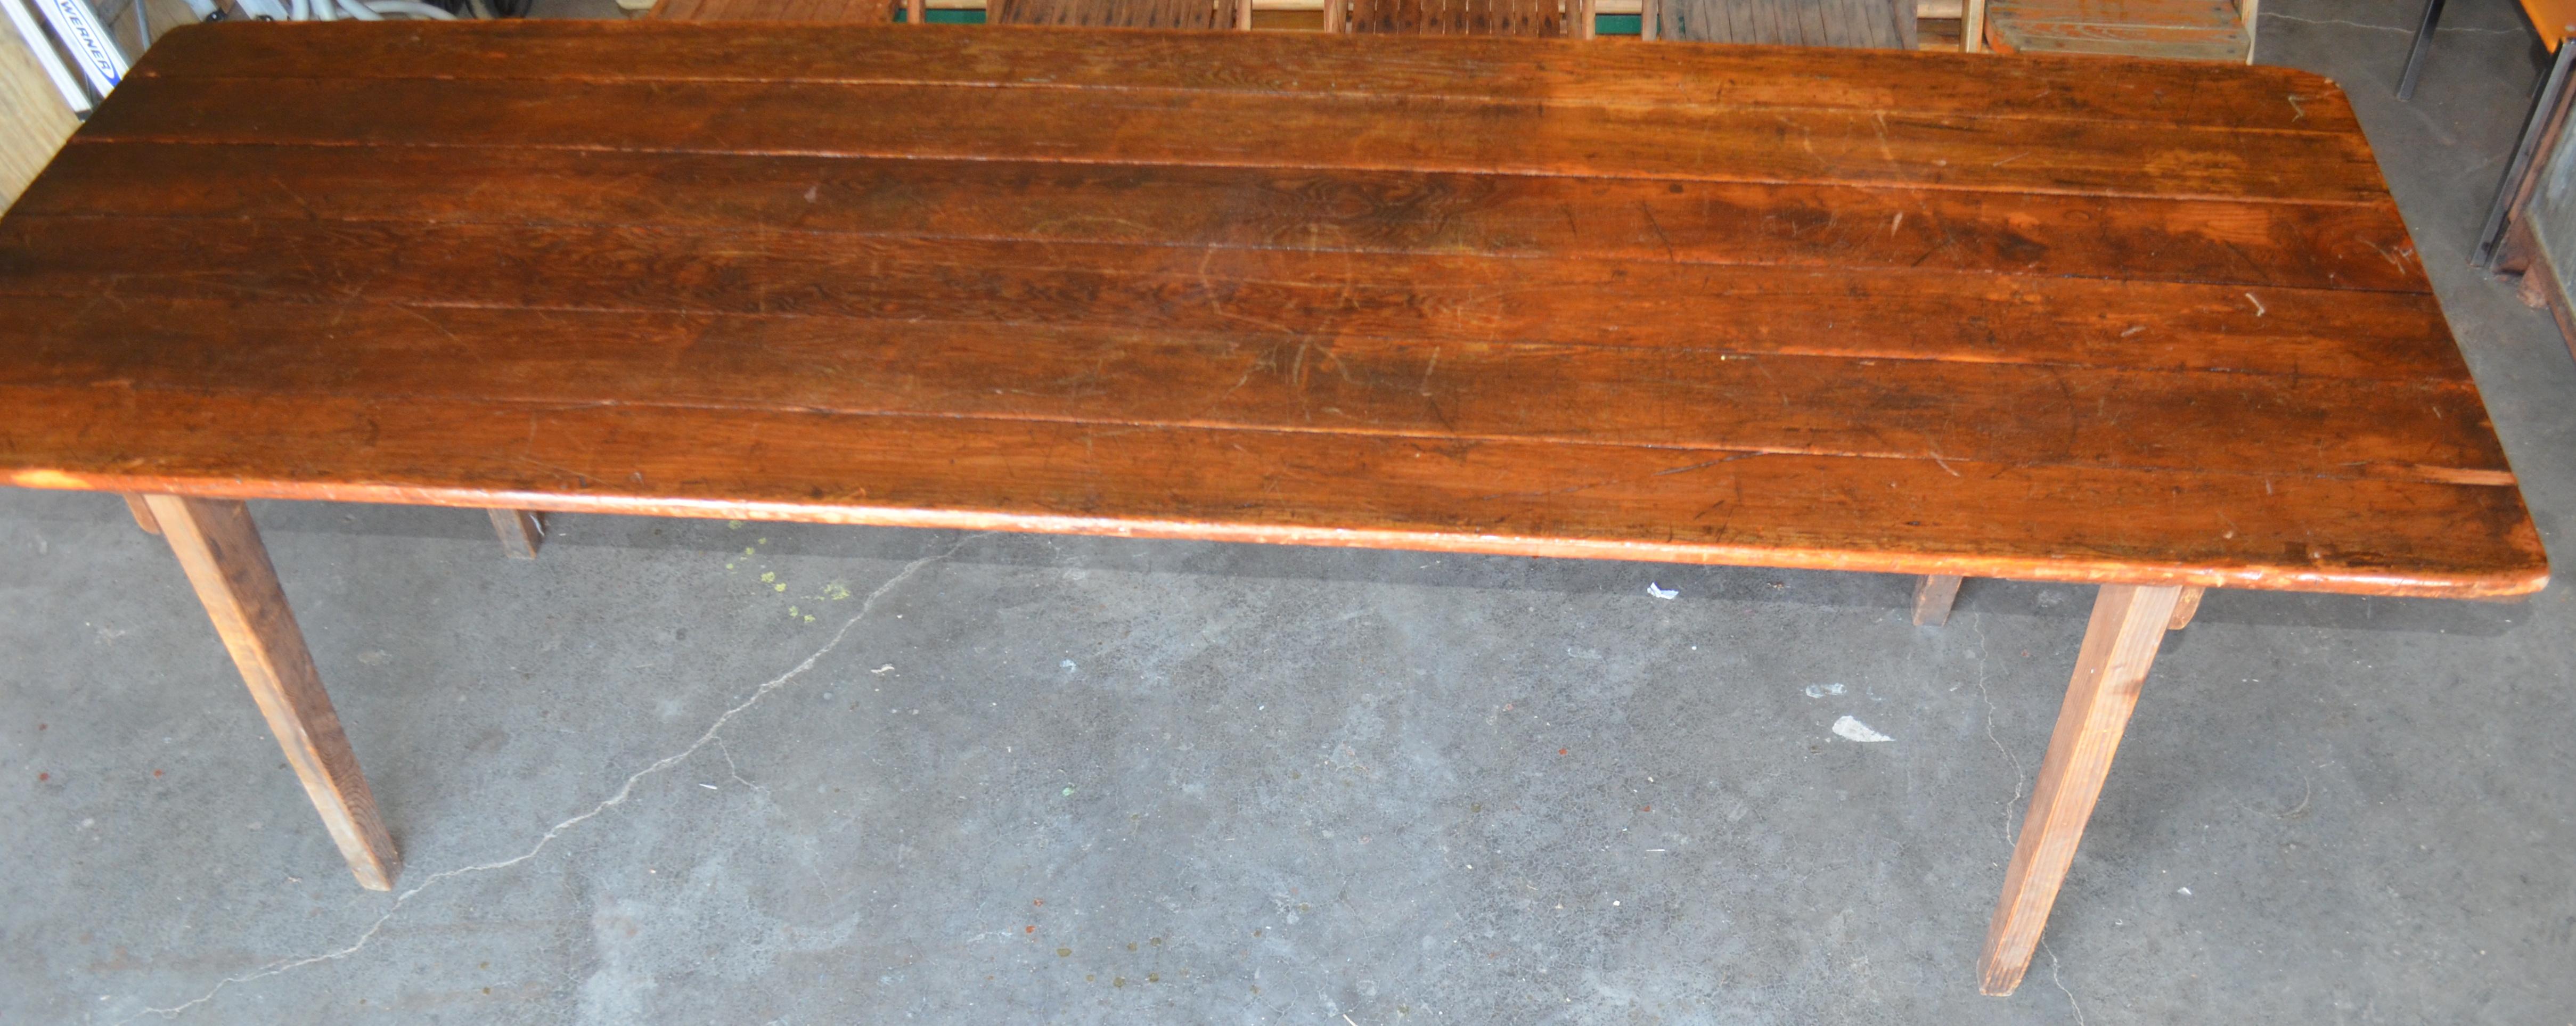 Harvest Table Handmade of Pine, Early 1900s, Legs Fold to Store For Sale 1